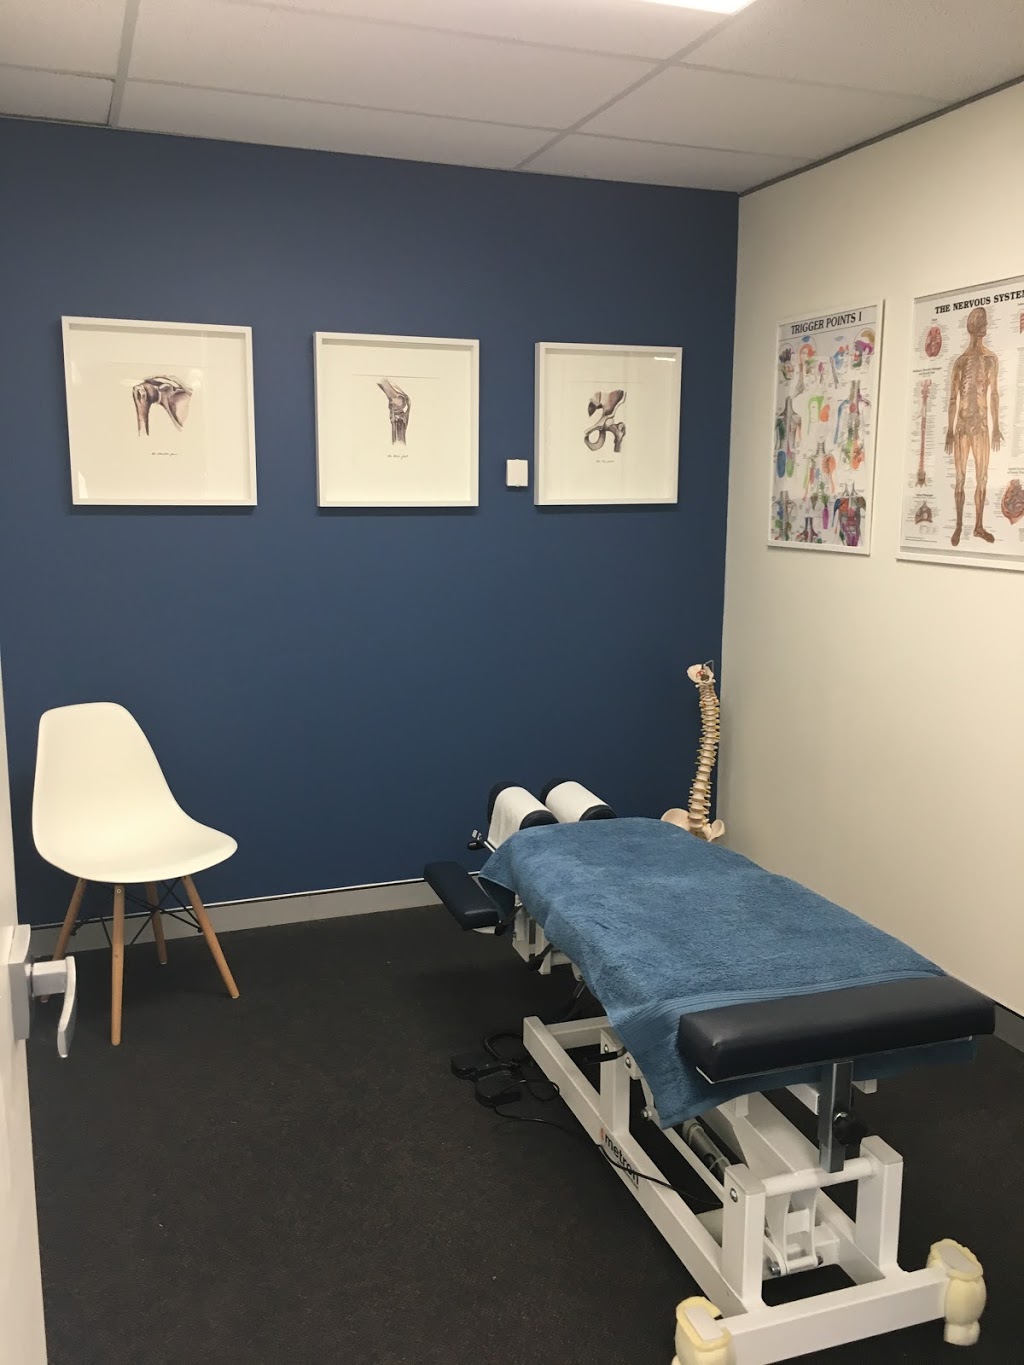 Physical Health | physiotherapist | 2/58 Bowral Rd, Mittagong NSW 2575, Australia | 0248723933 OR +61 2 4872 3933